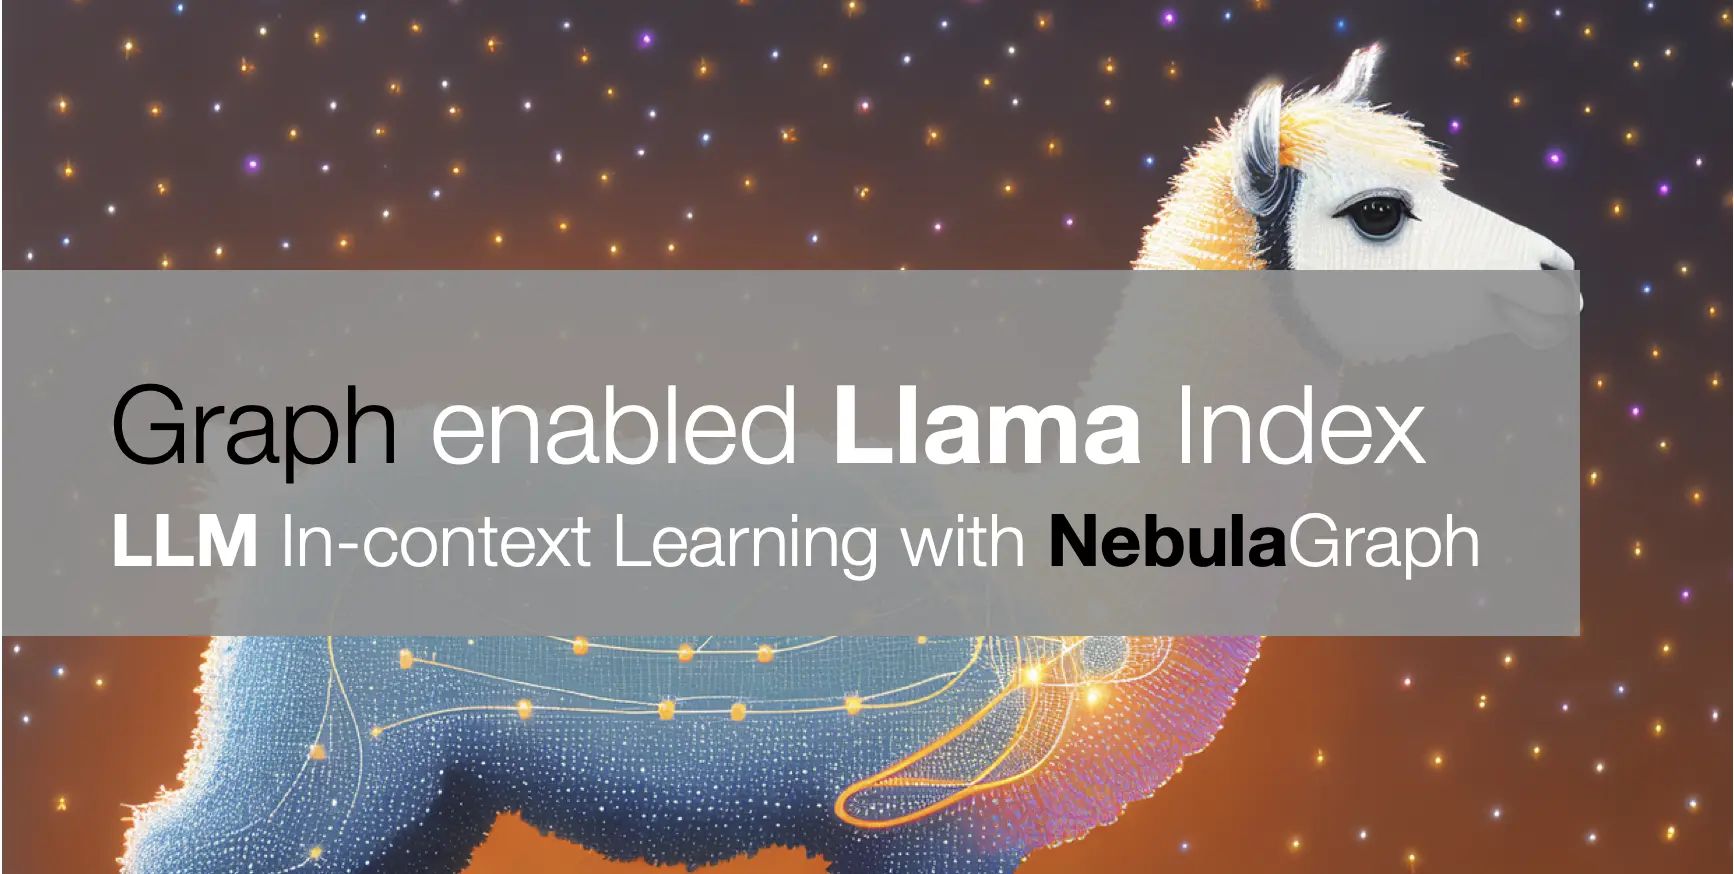 IPython-nGQL is a python package to extend the ability to connect Nebula Graph from your Jupyter Notebook or iPython. It's easier for data scientists to create, debug and share reusable and all-in-one Jupyter Notebooks with Nebula Graph interaction embedded.